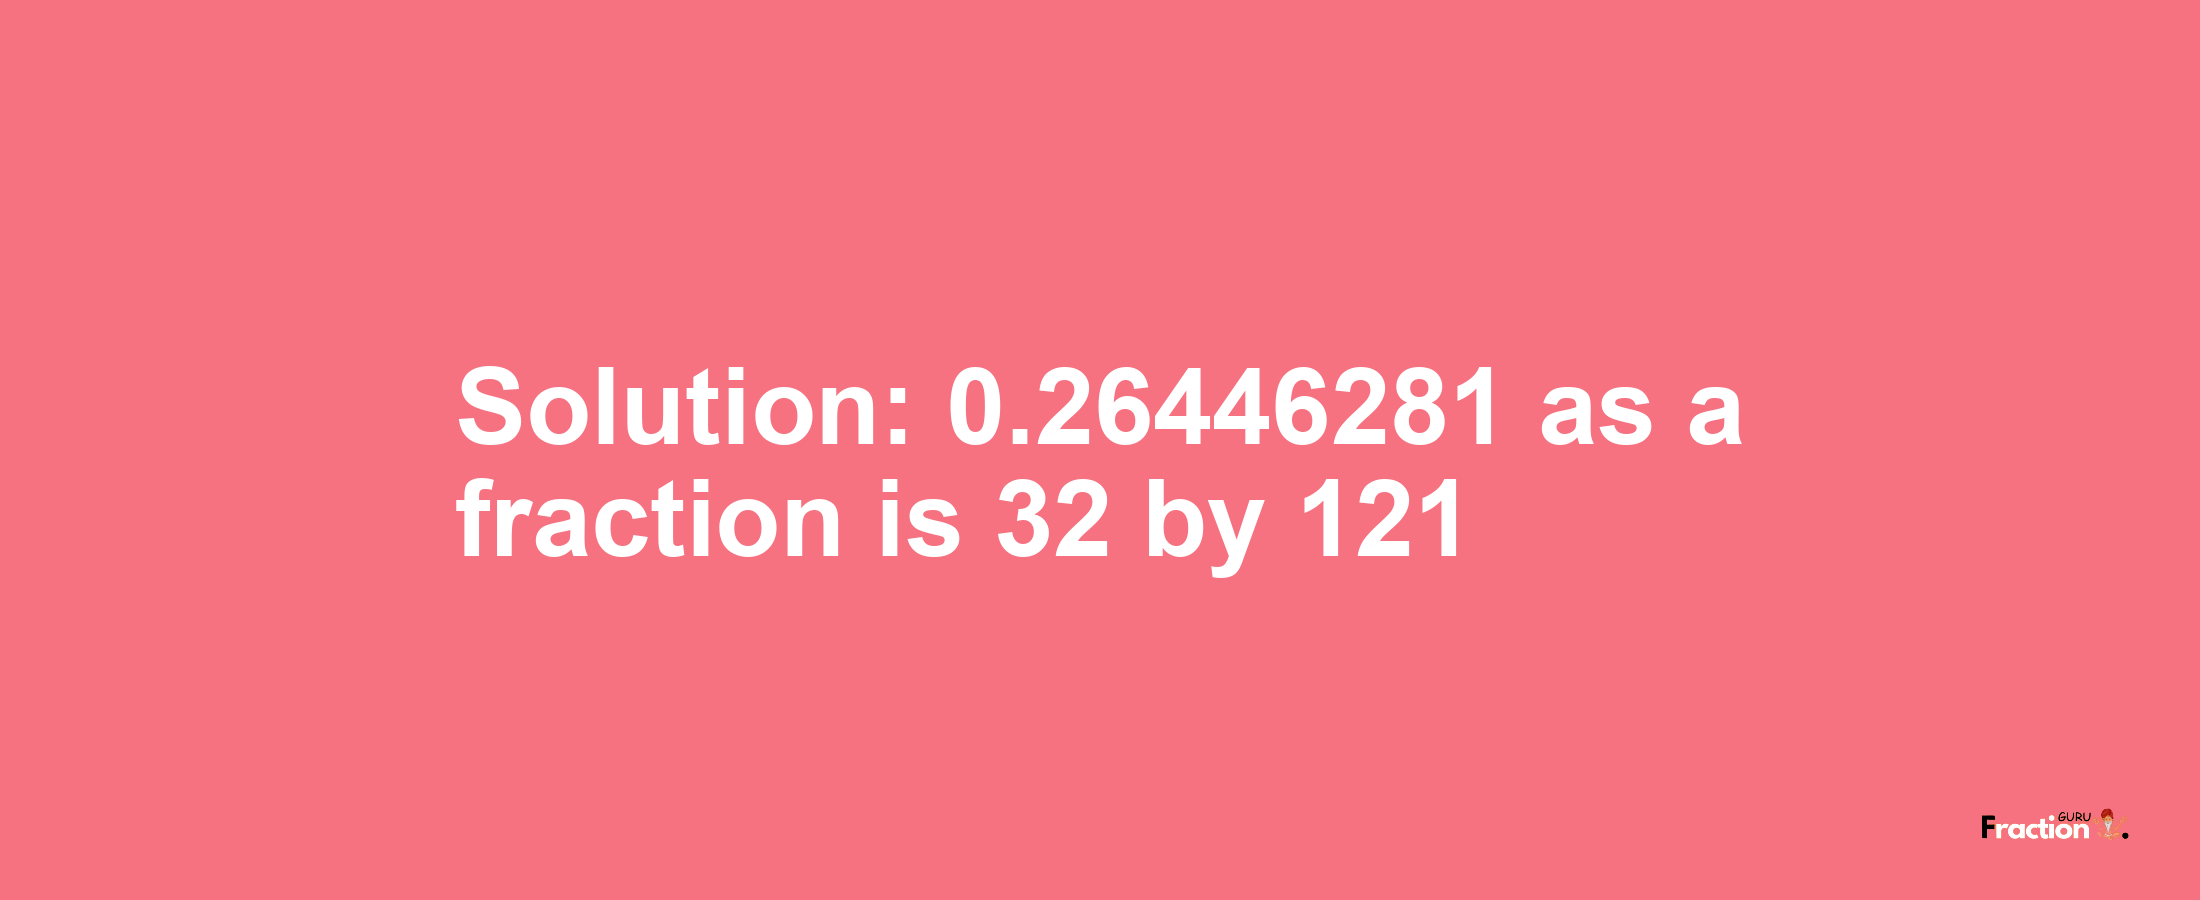 Solution:0.26446281 as a fraction is 32/121